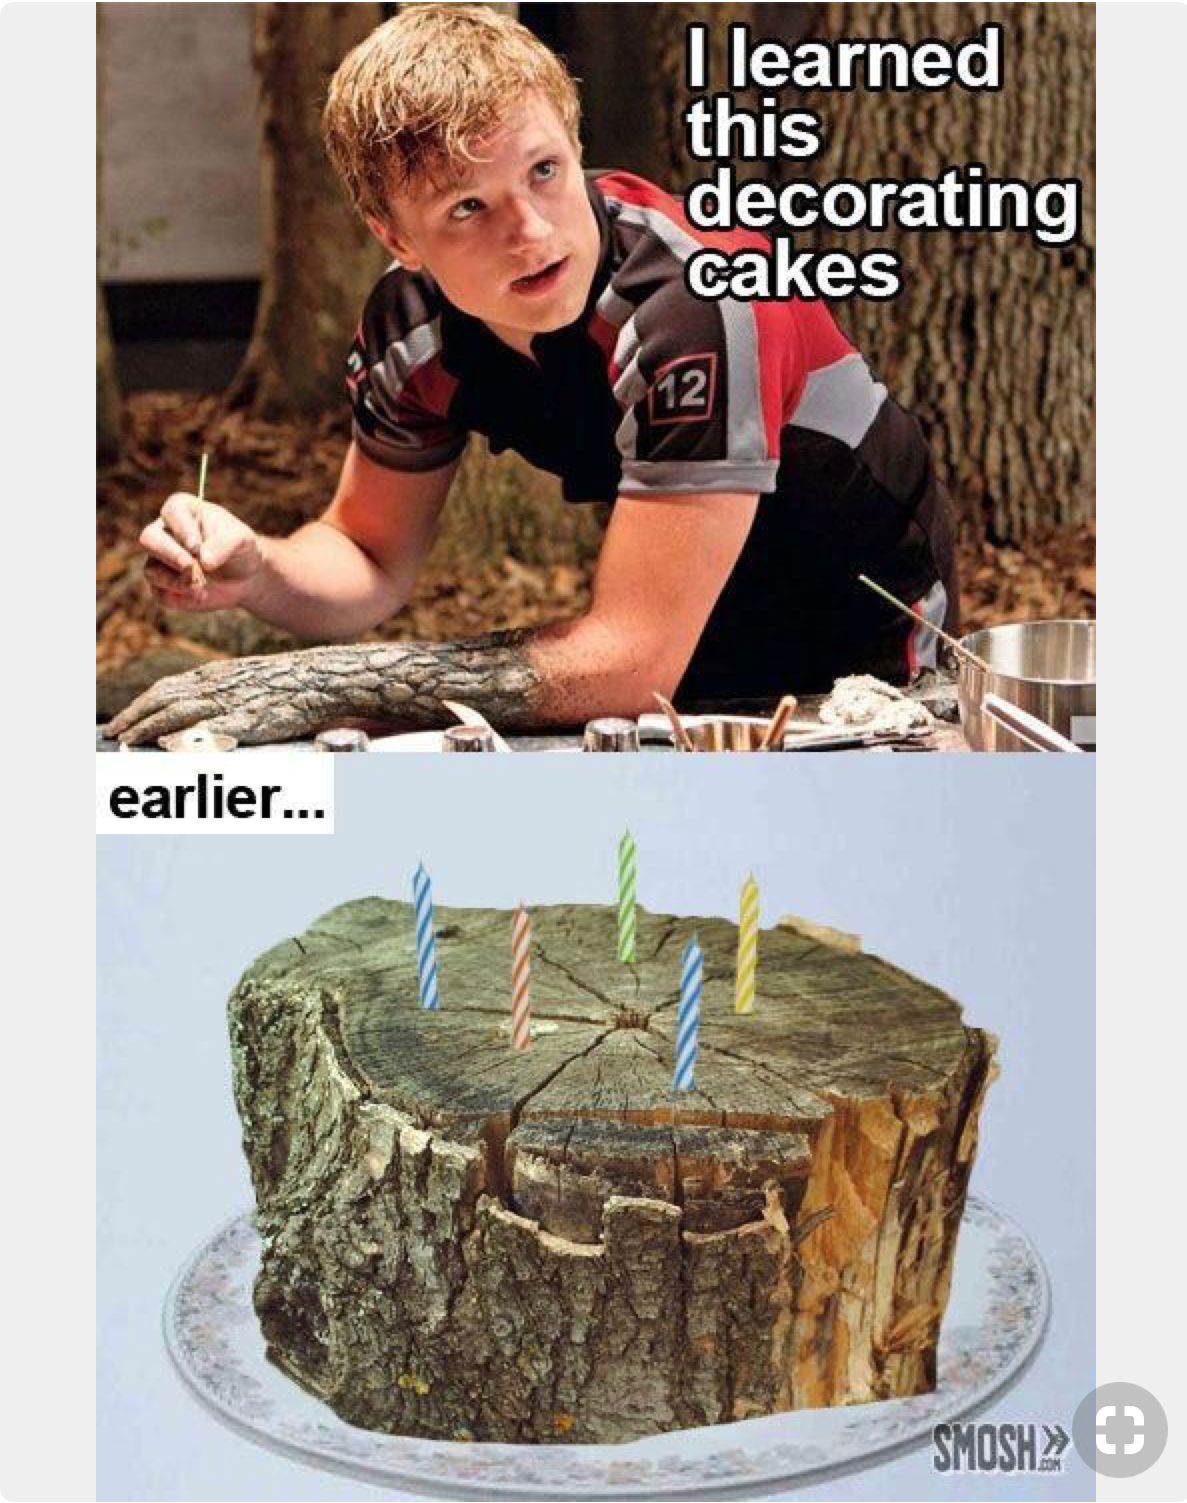 Hunger Games Meme - I Learned this Decorating Cakes